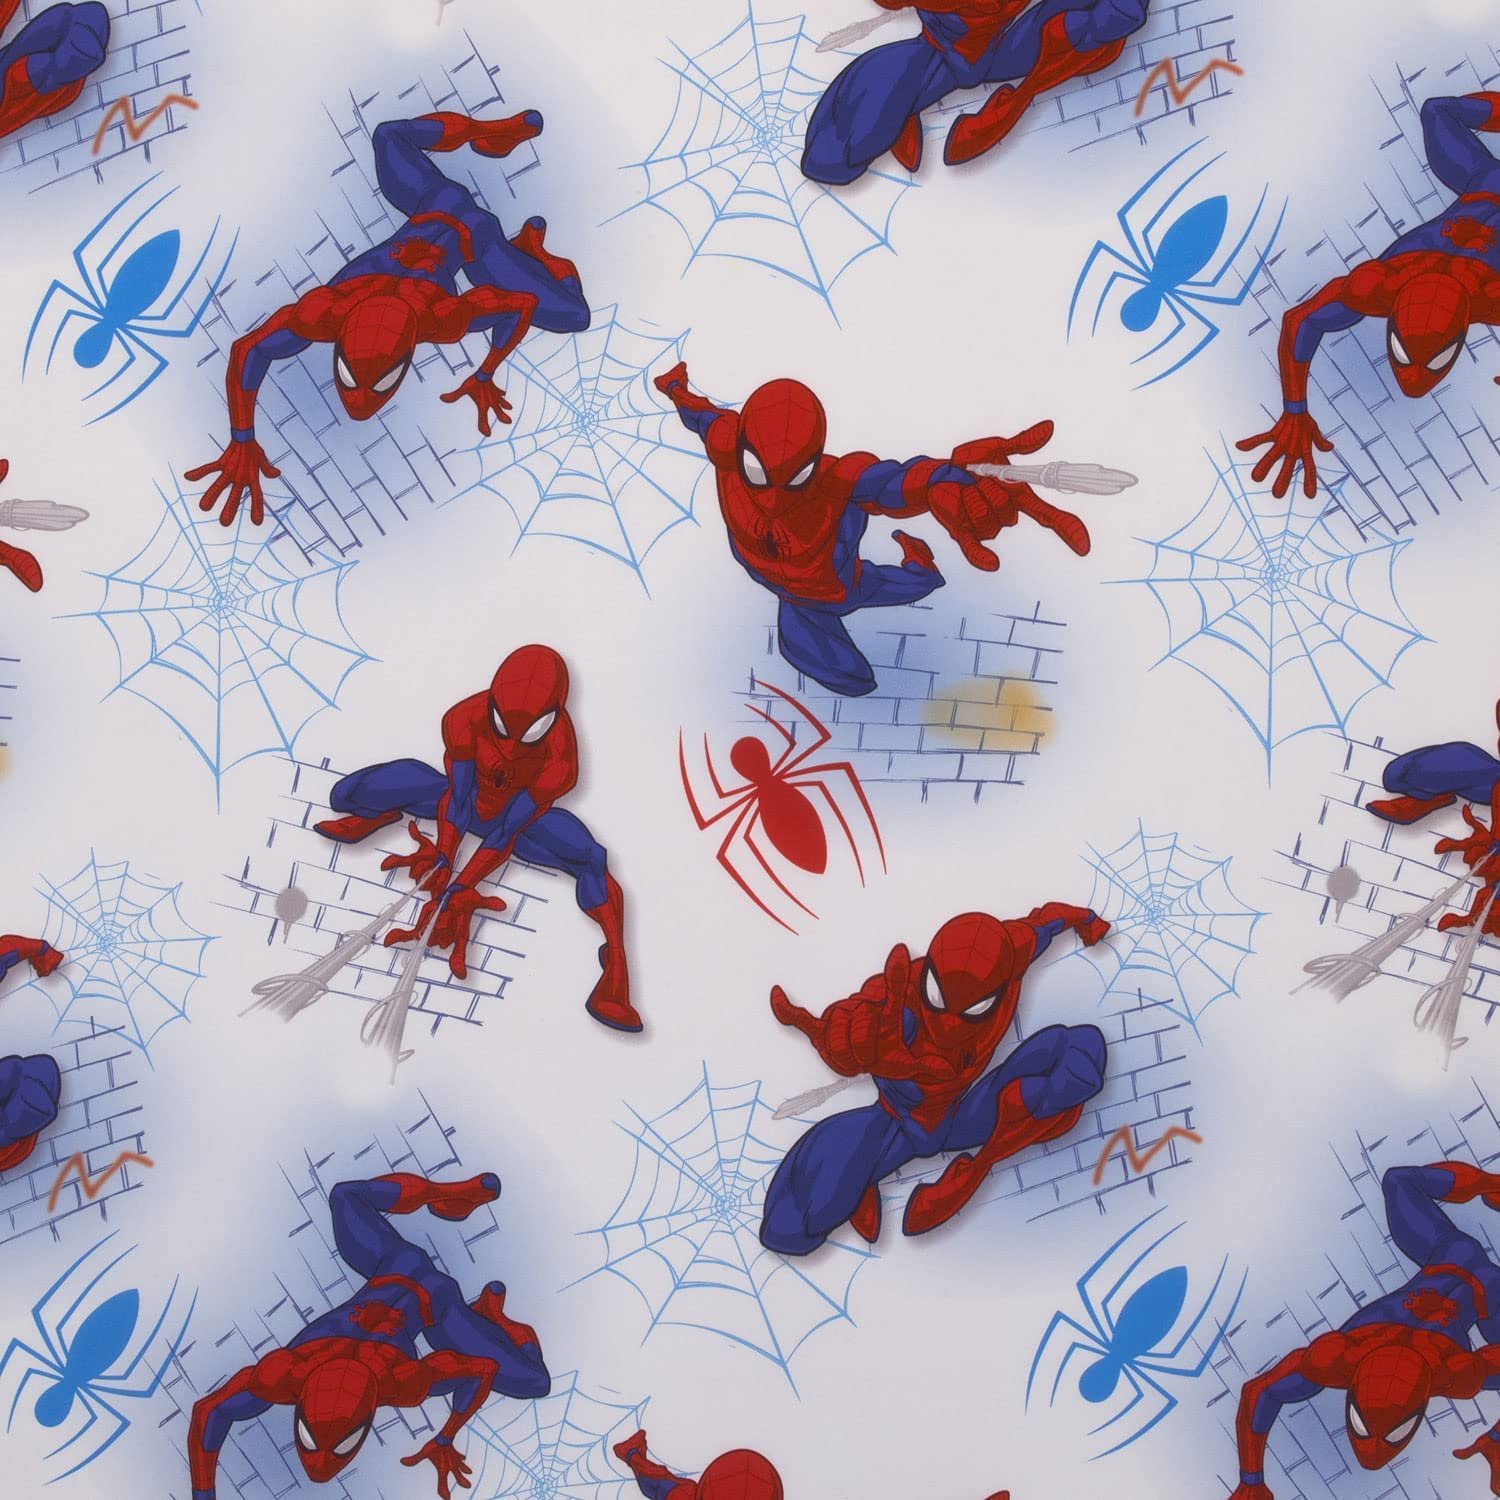 Marvel Spiderman Fitted Crib Sheet 100% Soft Microfiber, Baby Sheet, Fits Standard Size Crib Mattress 28in x 52in - image 4 of 4